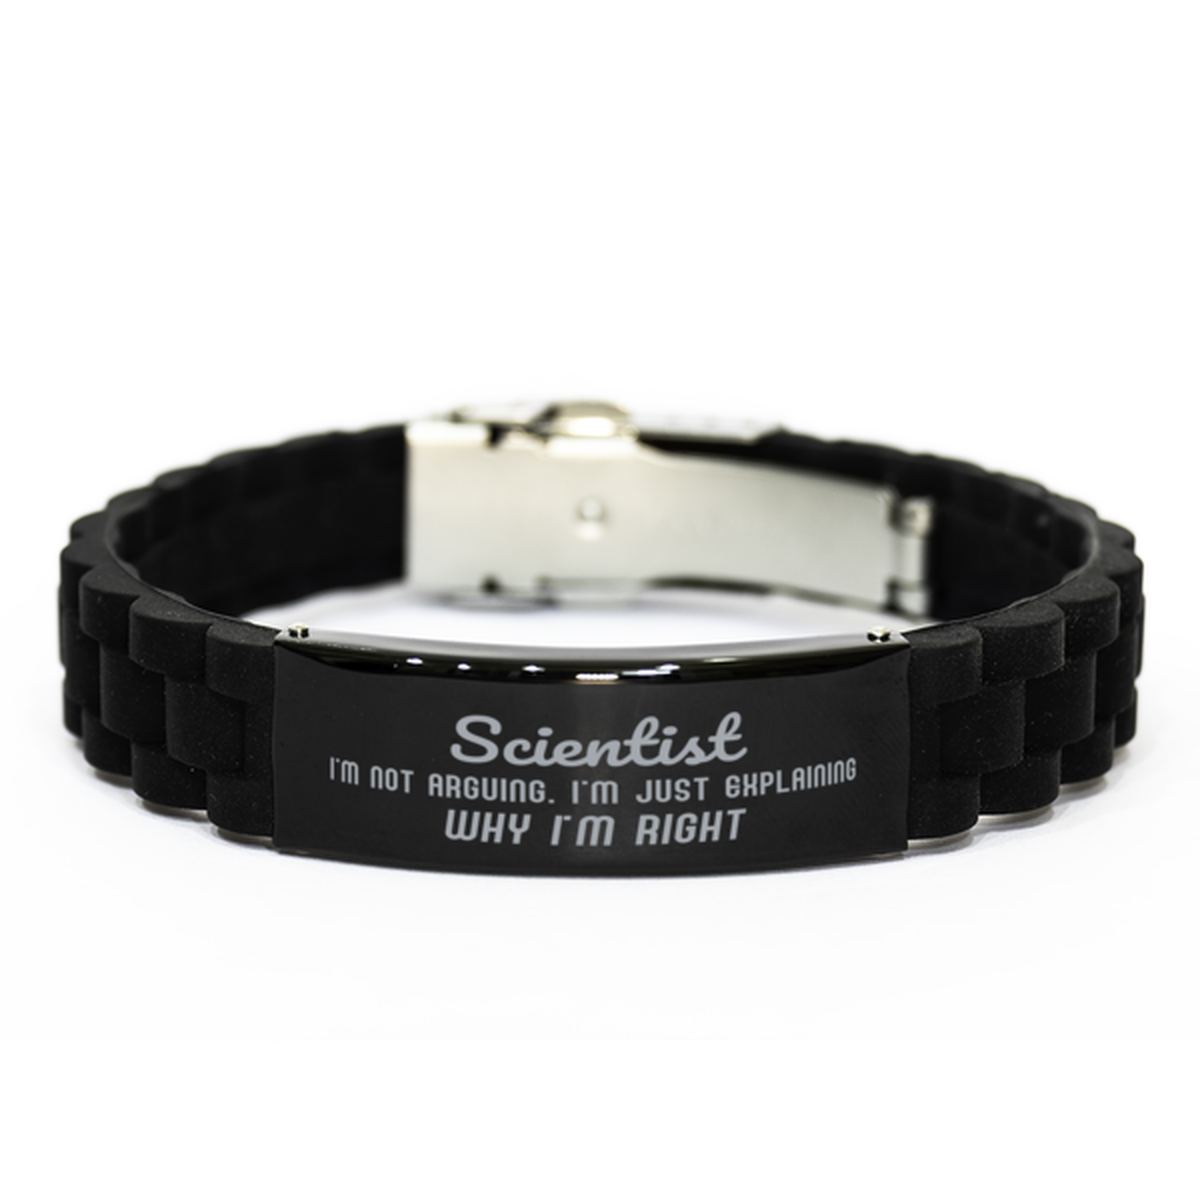 Scientist I'm not Arguing. I'm Just Explaining Why I'm RIGHT Black Glidelock Clasp Bracelet, Funny Saying Quote Scientist Gifts For Scientist Graduation Birthday Christmas Gifts for Men Women Coworker